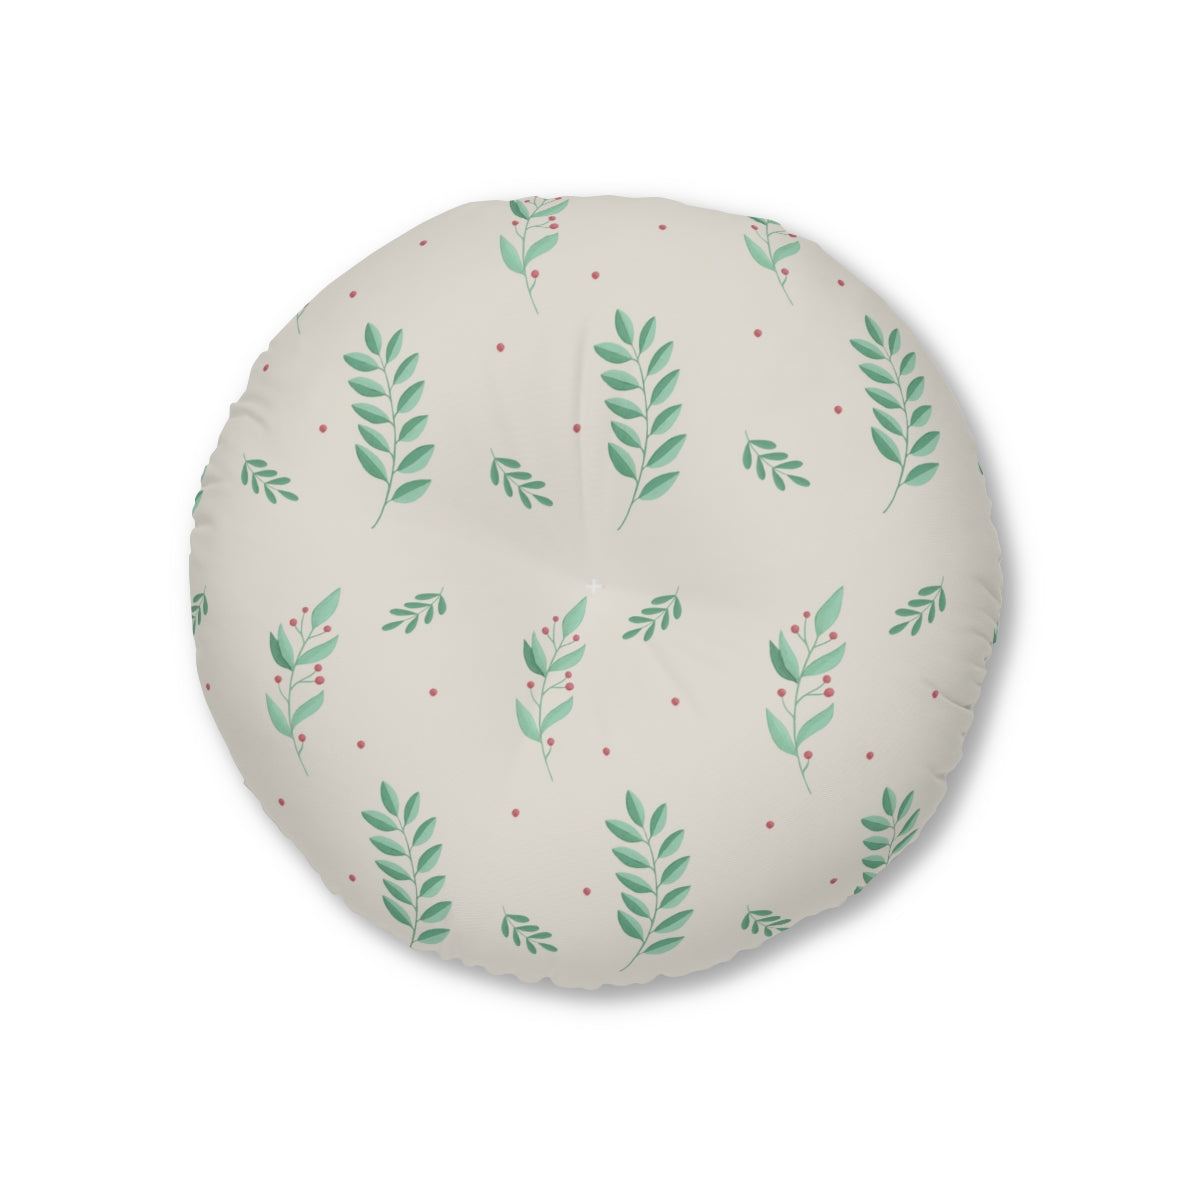 Lifestyle Details - Round Tufted Holiday Floor Pillow - Large Evergreens - 26x26 - Front View